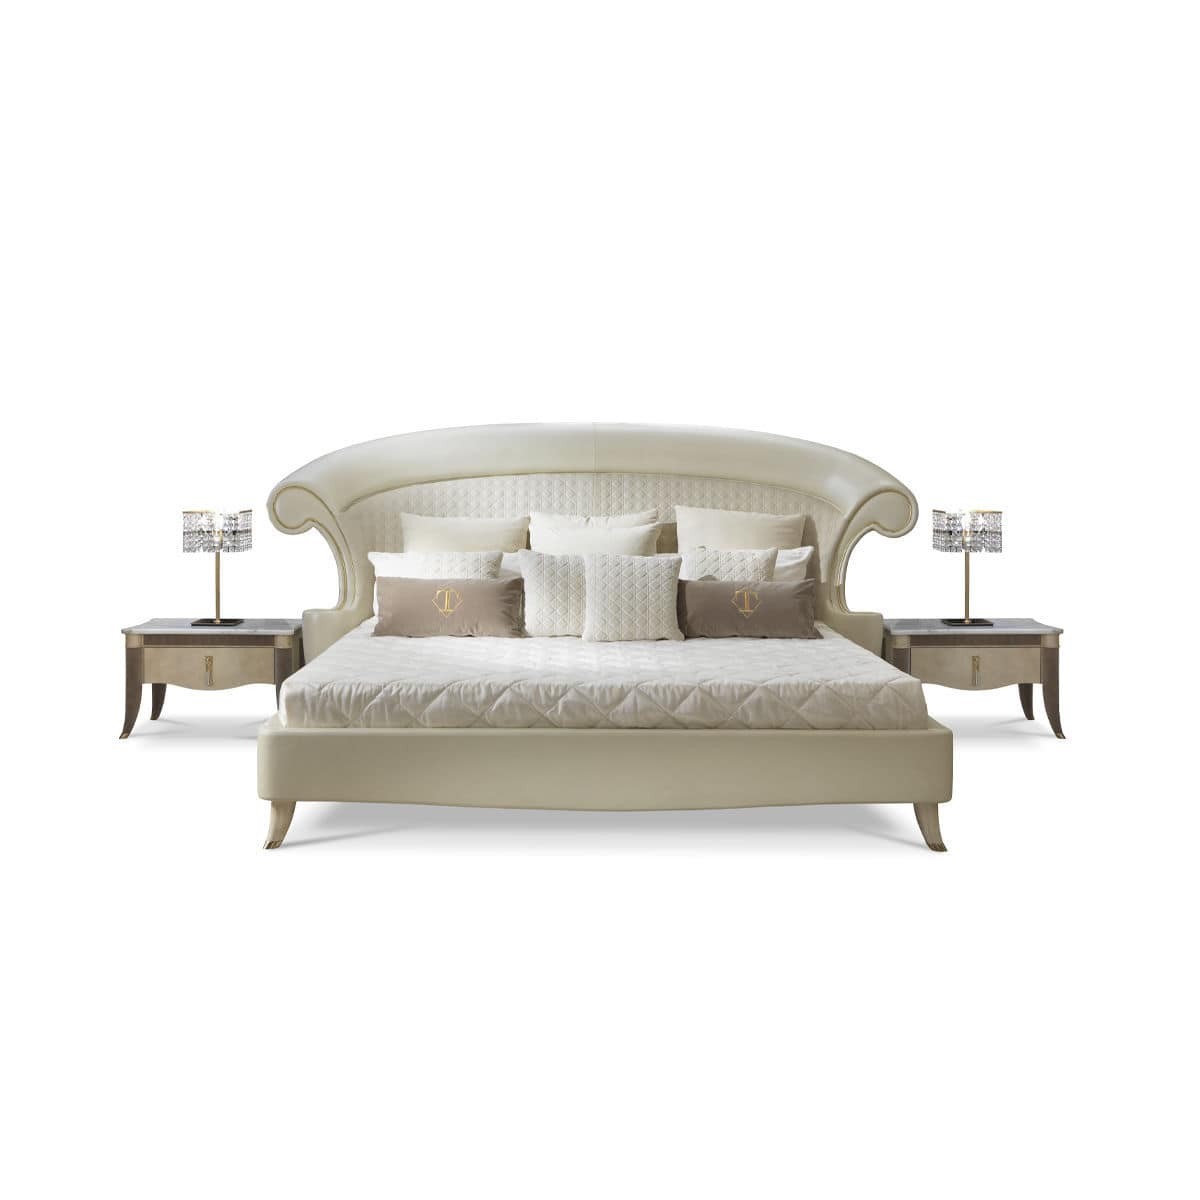 Caractere Bed